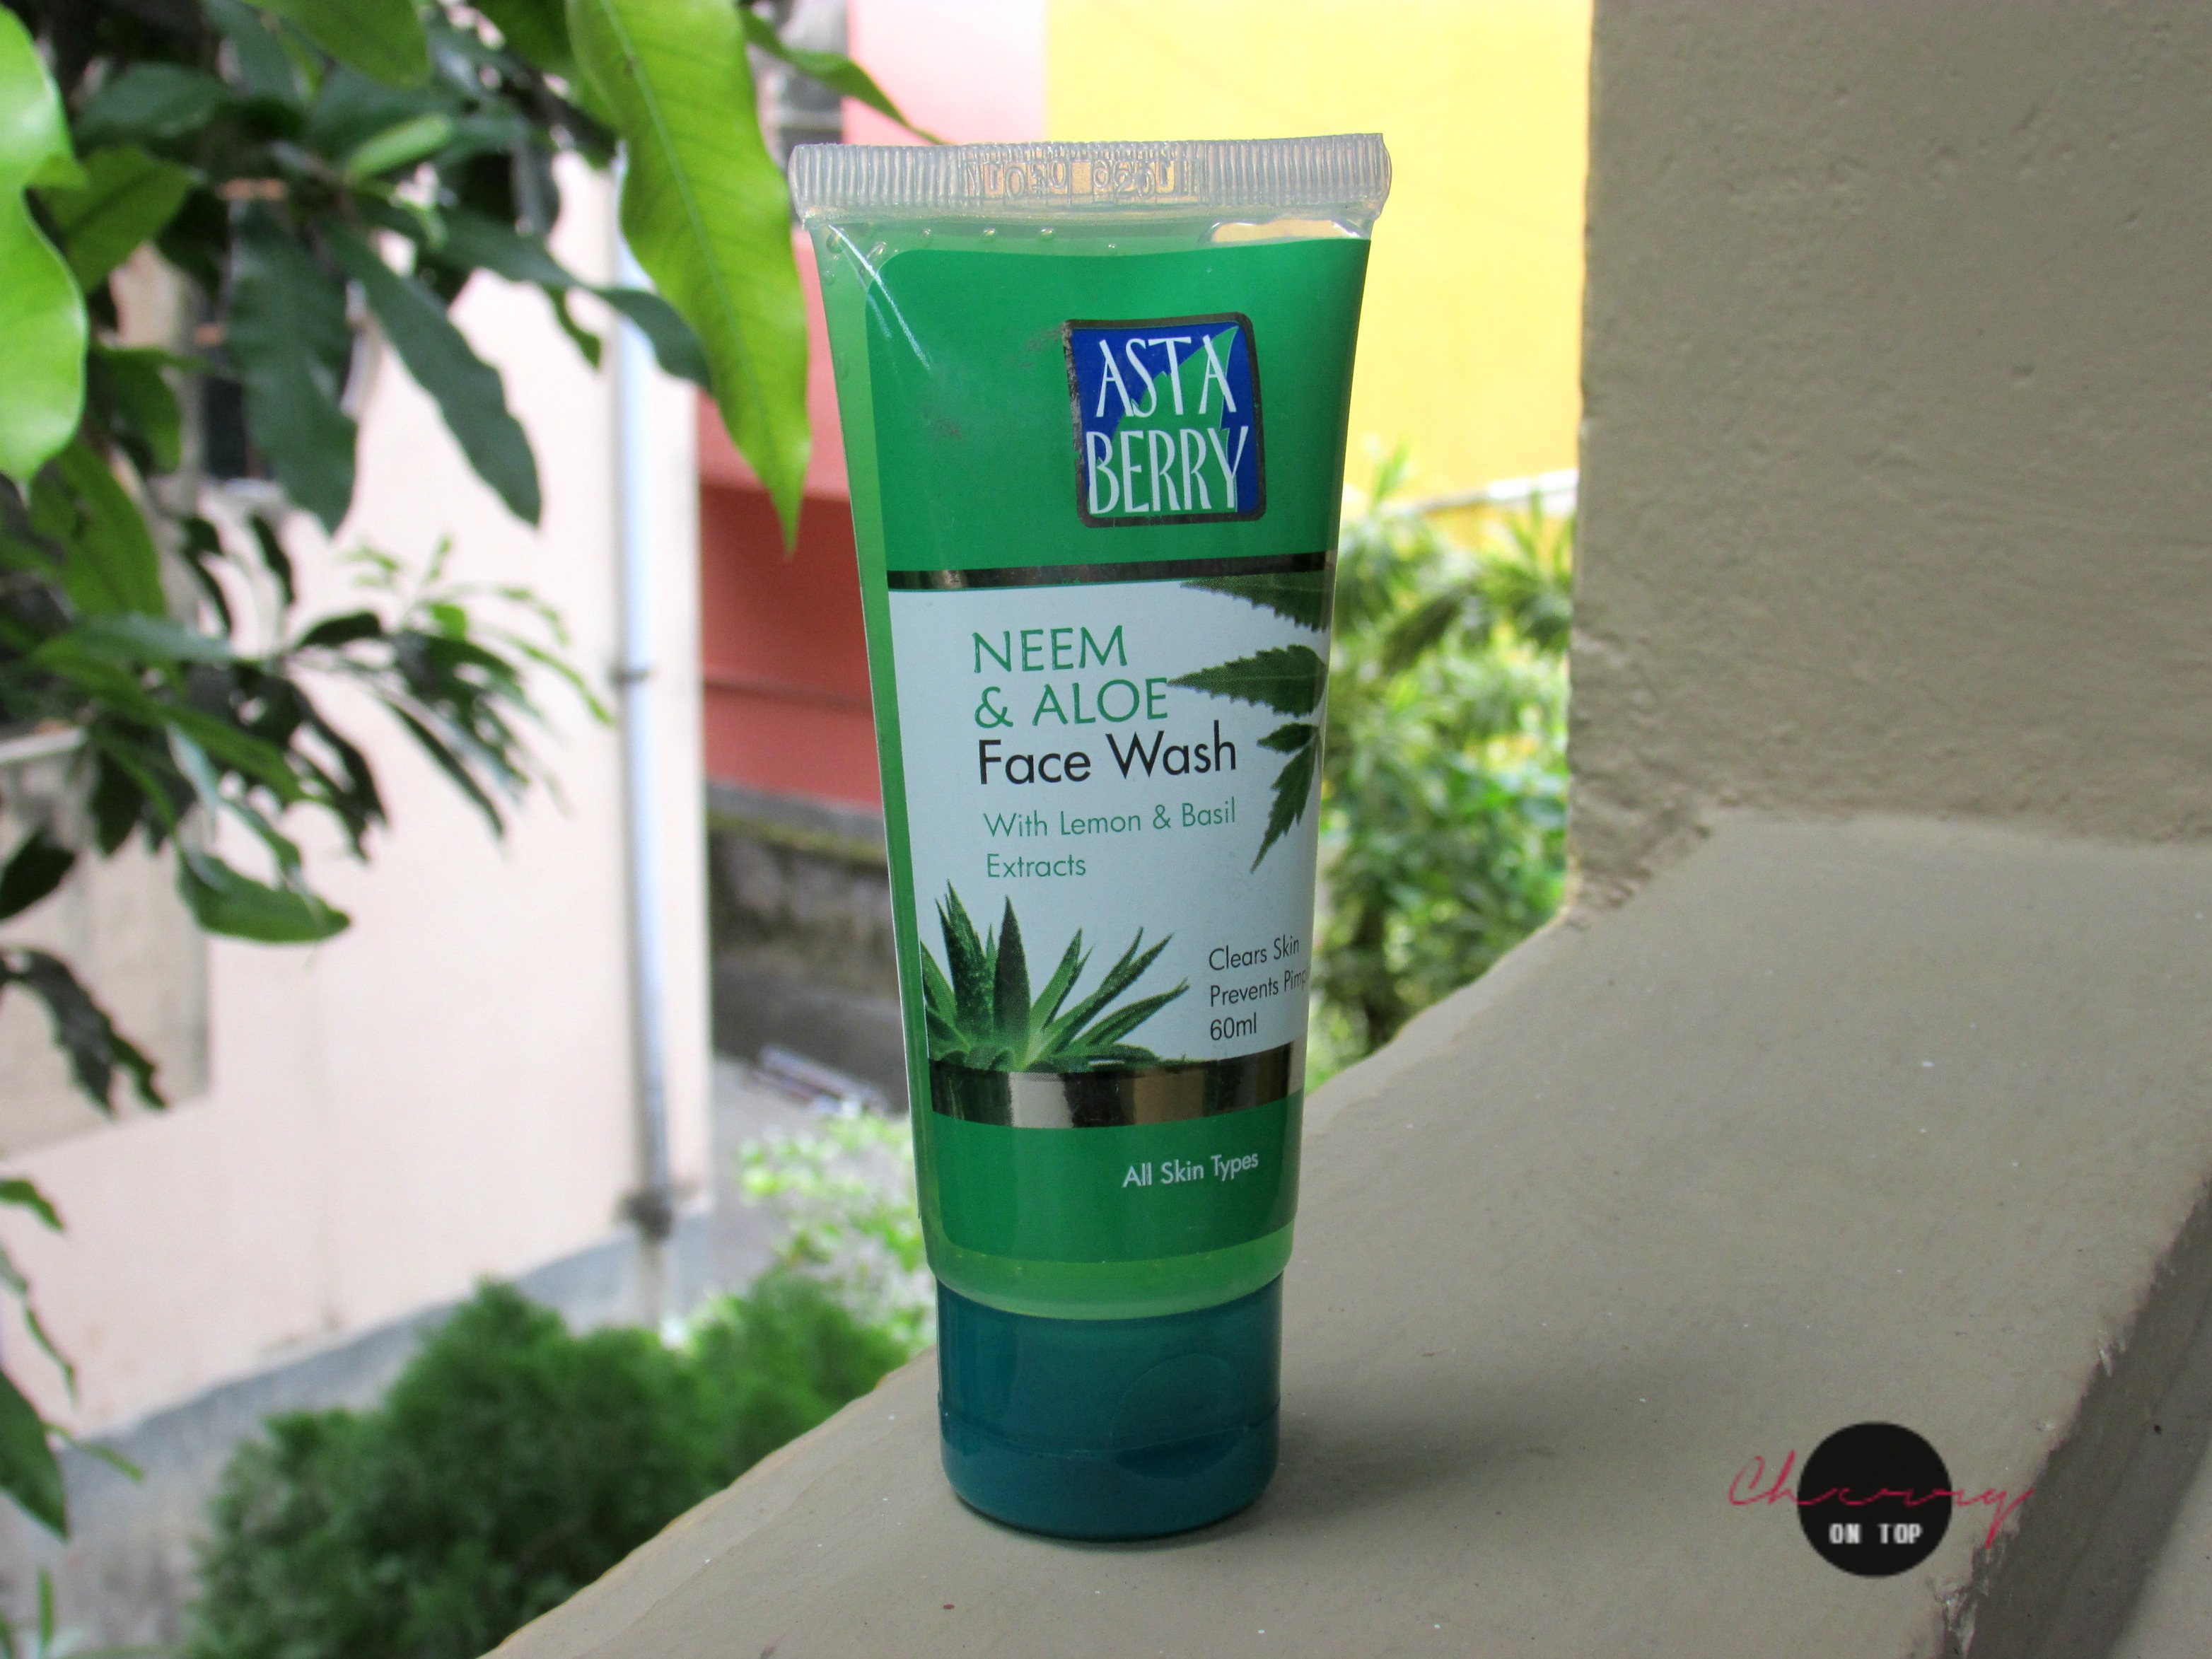 Astaberry Neem & Aloe Face Wash Review | Cherry On Top